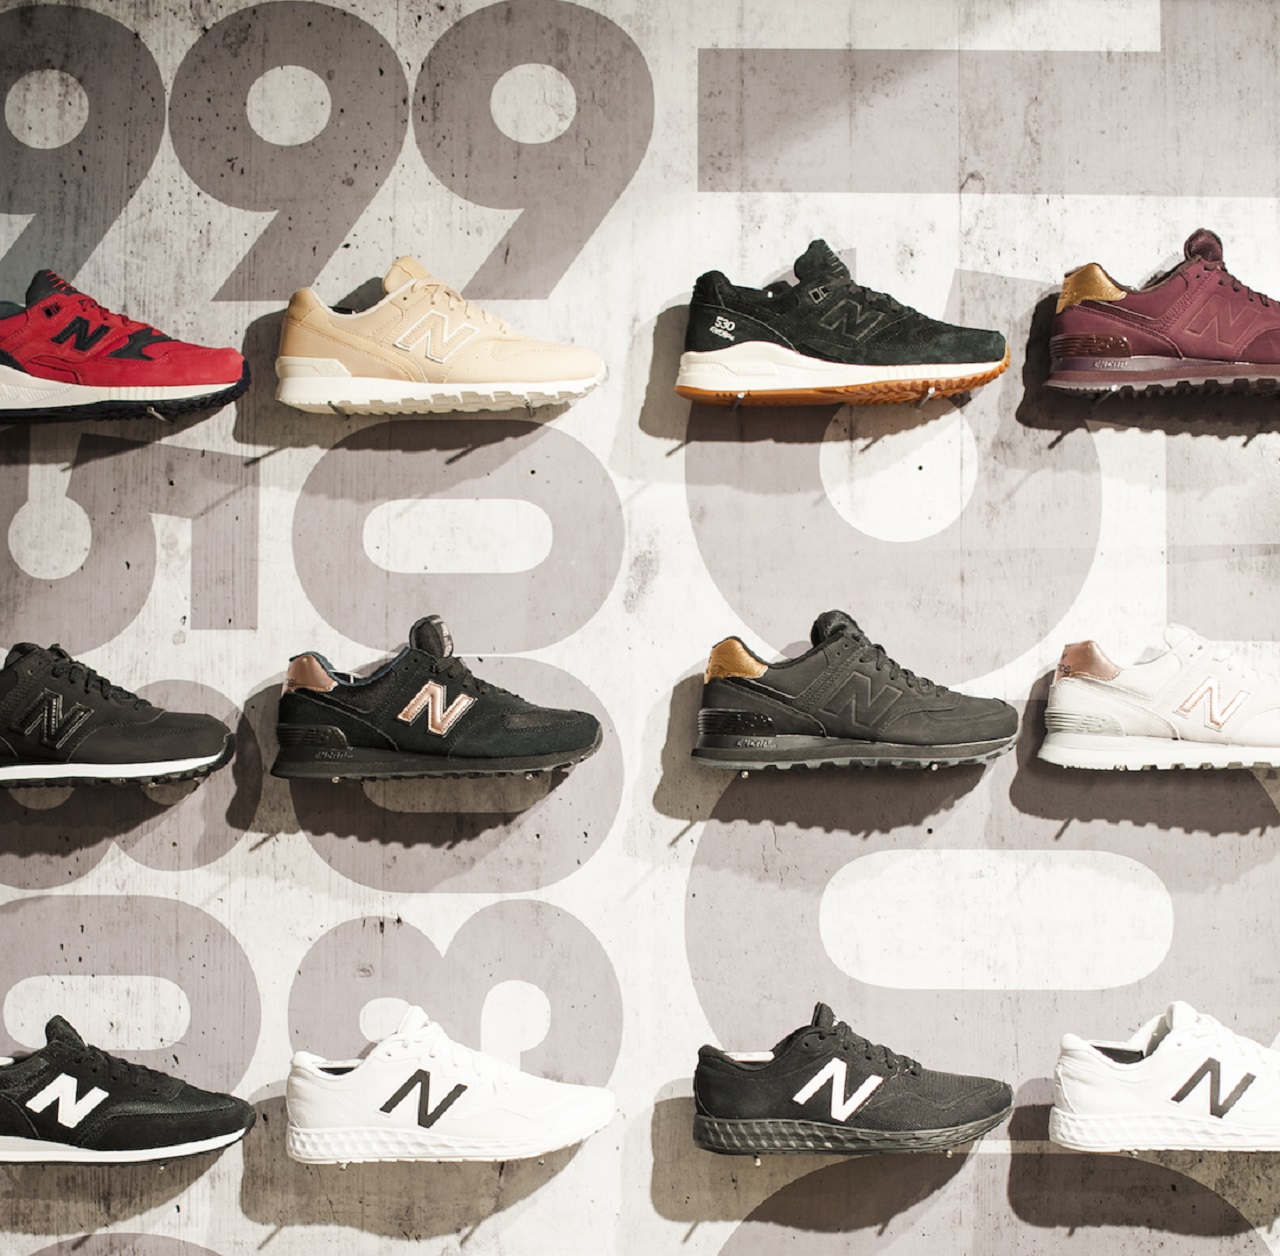 New Balance has opened a slick new store at Melbourne Central